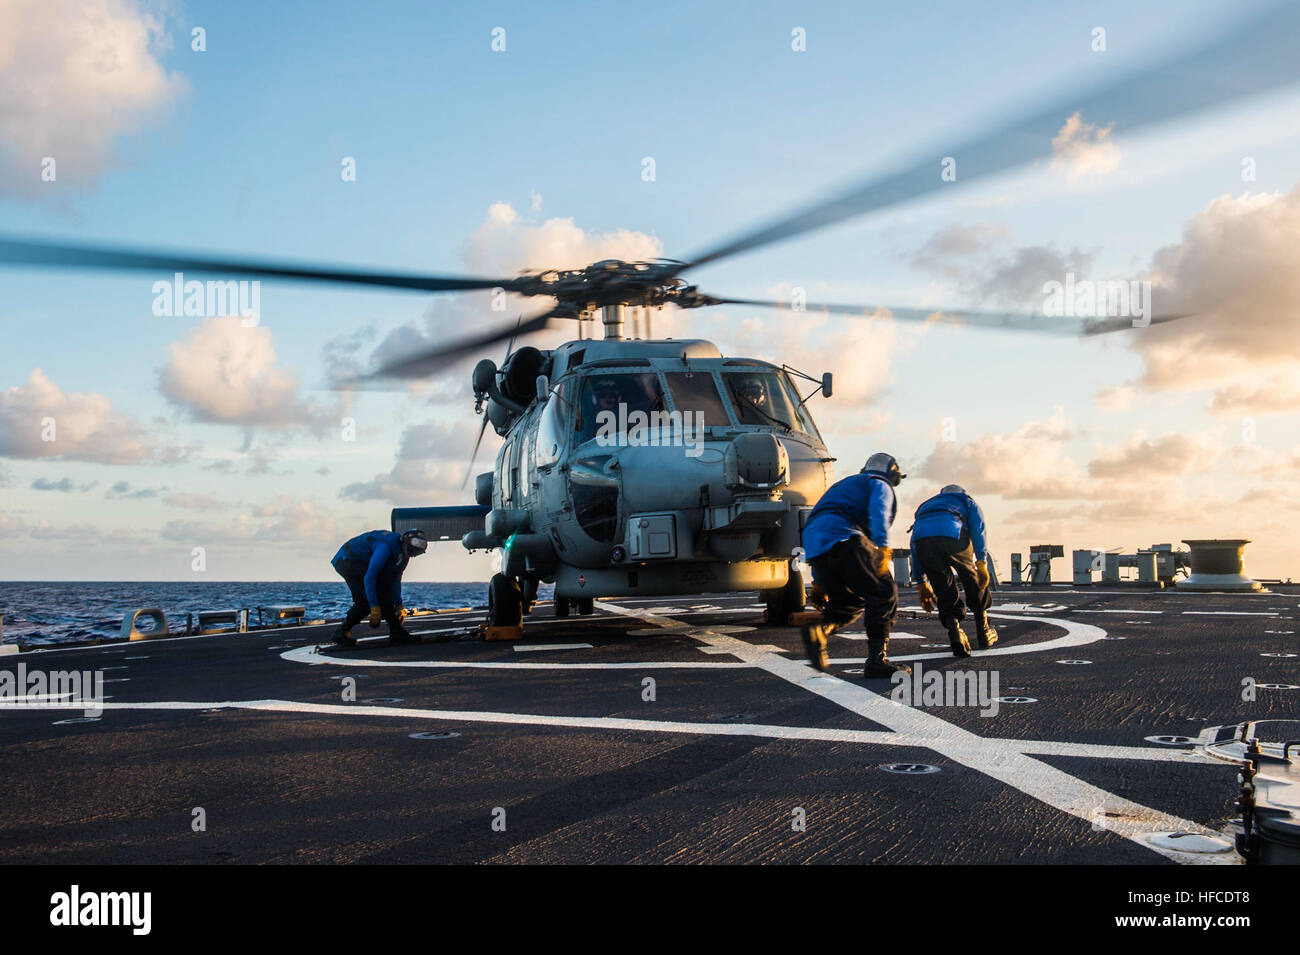 150325-N-XM324-034 WATERS NEAR GUAM (March 25, 2015) Sailors prepare to remove chocks and chains from an MH-60R Seahawk of Helicopter Maritime Strike Squadron (HSM) 51 as it prepares to depart from the flight deck of the Arleigh Burke-class guided missile destroyer USS Fitzgerald (DG 62) during Multi-Sail 2015. Multi-Sail is an annual Destroyer Squadron 15 exercise designed to assess combat systems, improve teamwork and increase warfighting capabilities in the Seventh Fleet area of responsibility. Japan Maritime Self-Defense Force (JMSDF) is participating in Multi-Sail for the first time to im Stock Photo